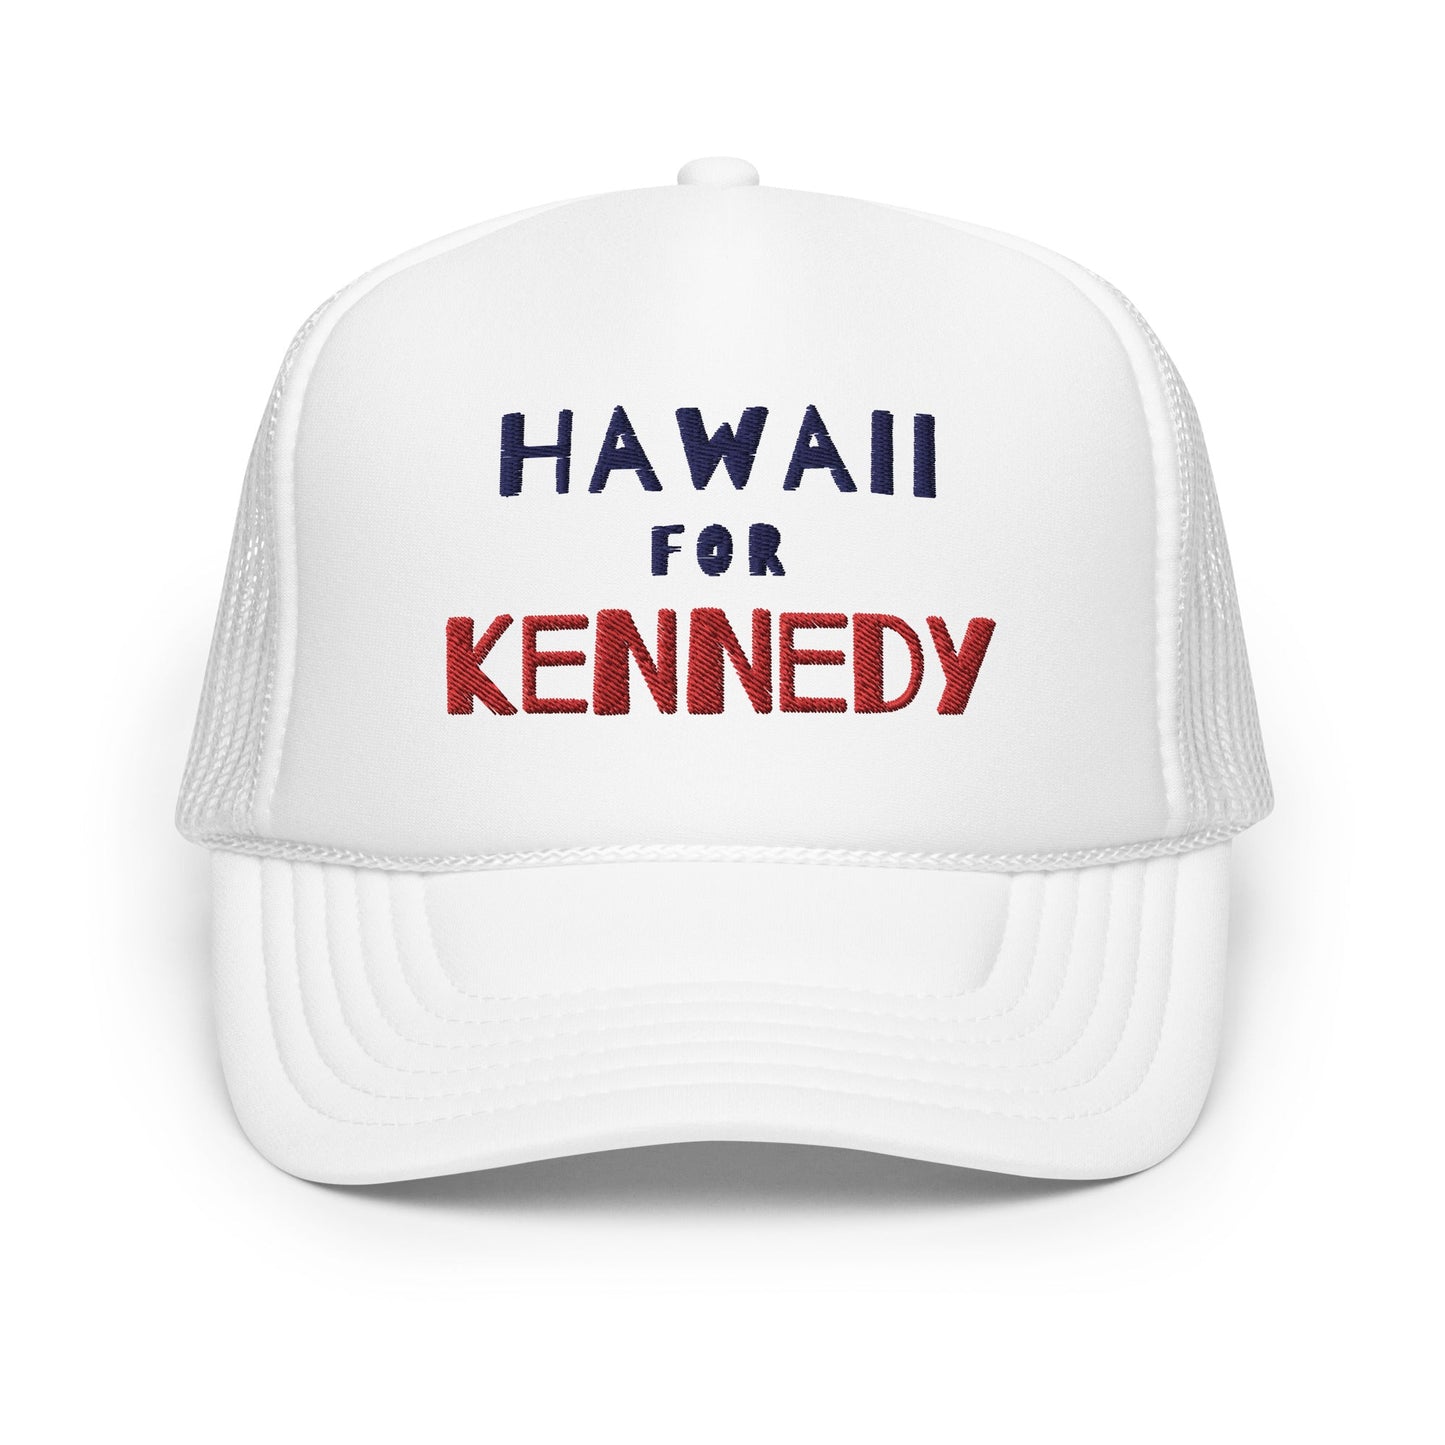 Hawaii for Kennedy Foam Trucker Hat - TEAM KENNEDY. All rights reserved